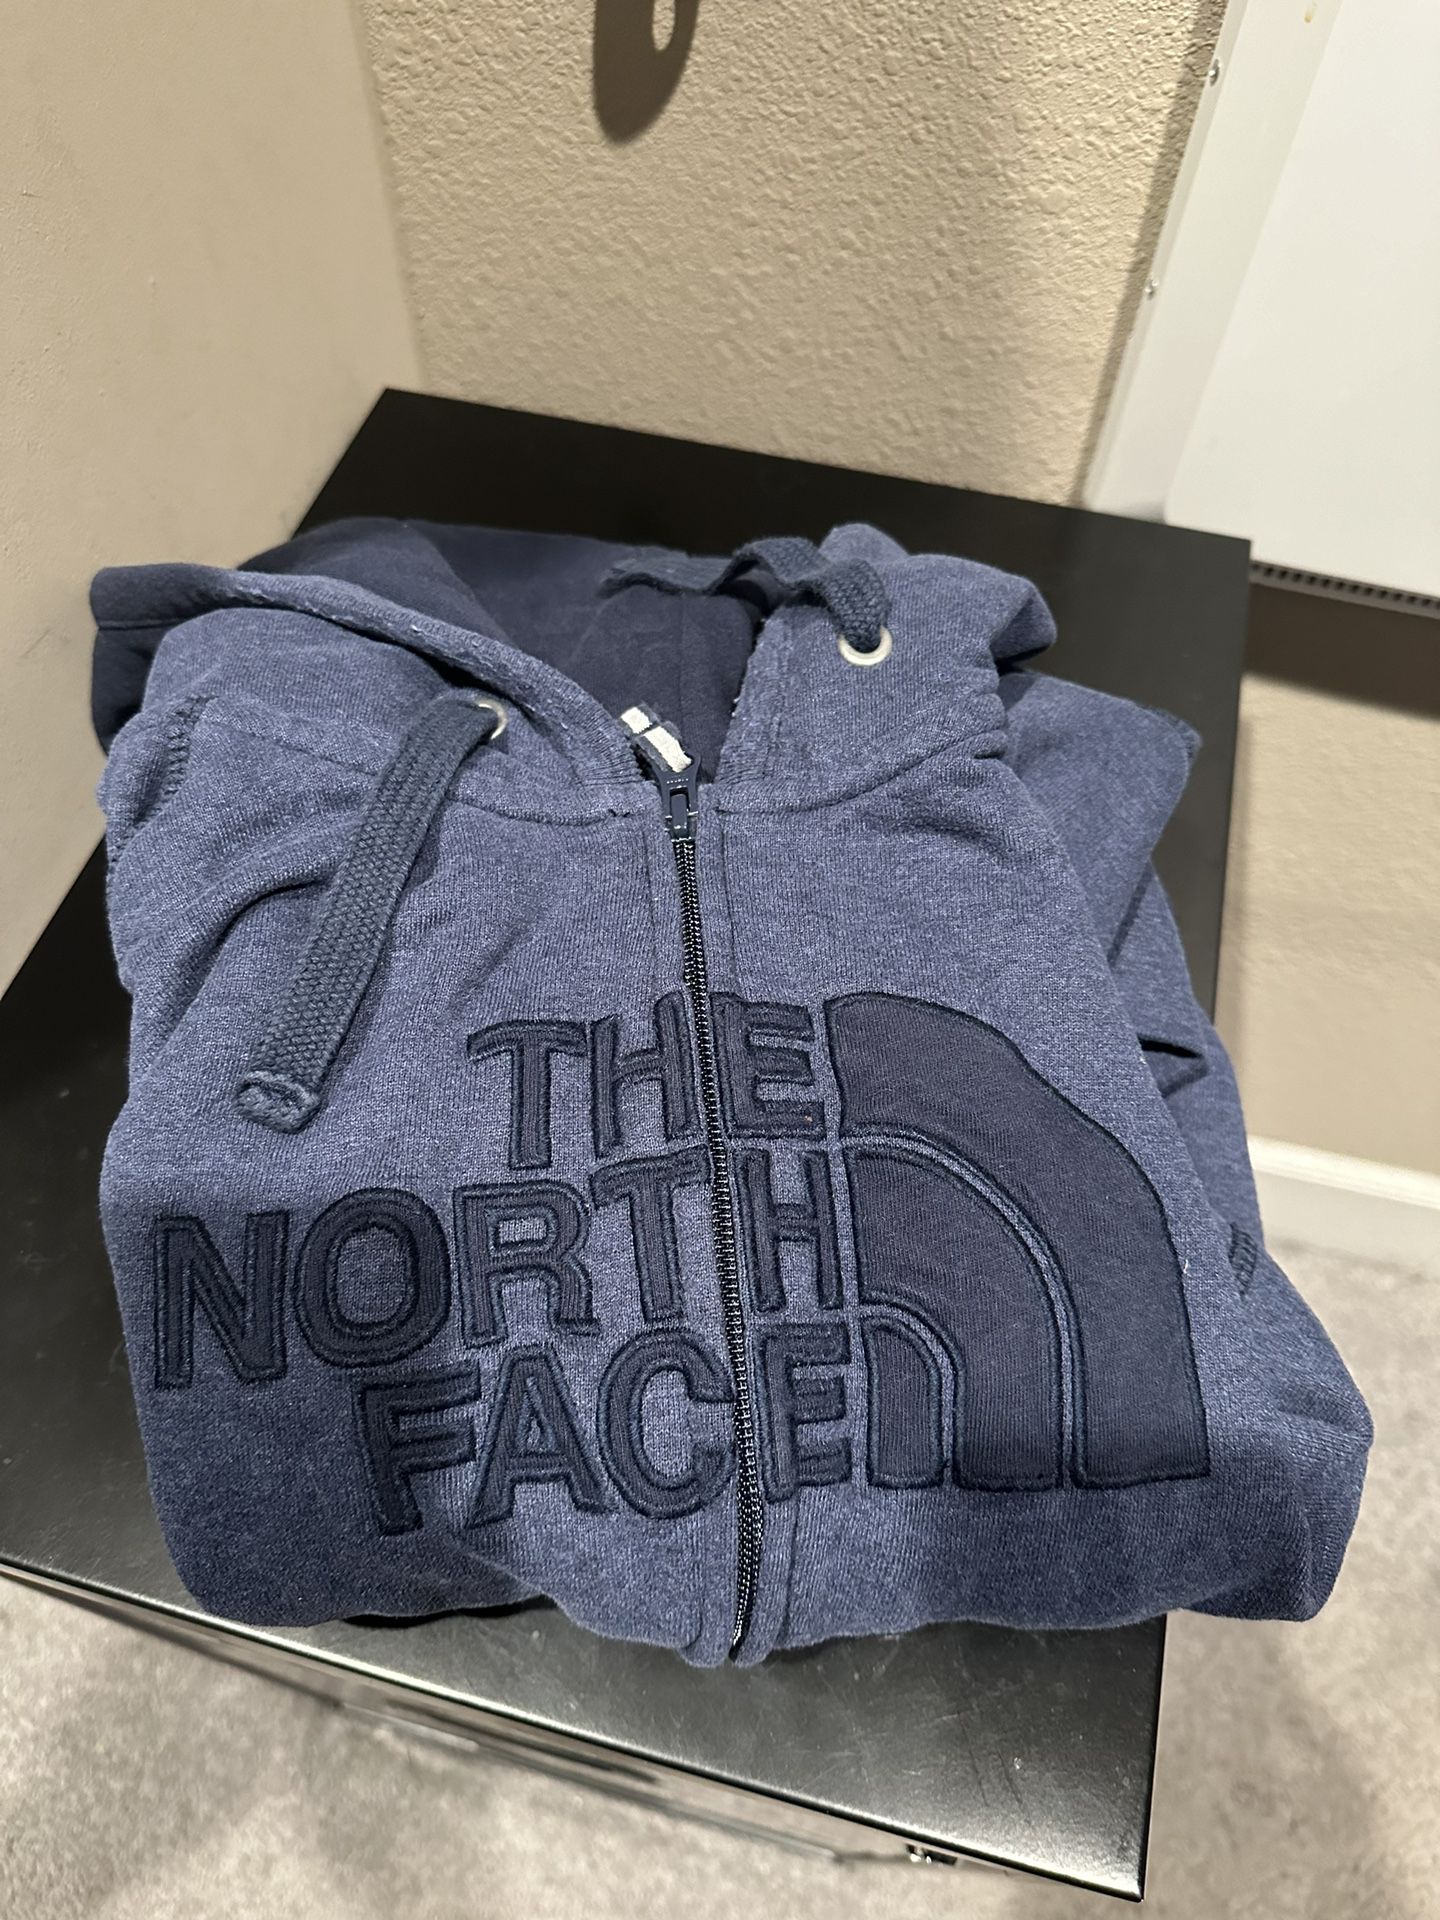 North face Zippered Hoodies Like New Never Worn 